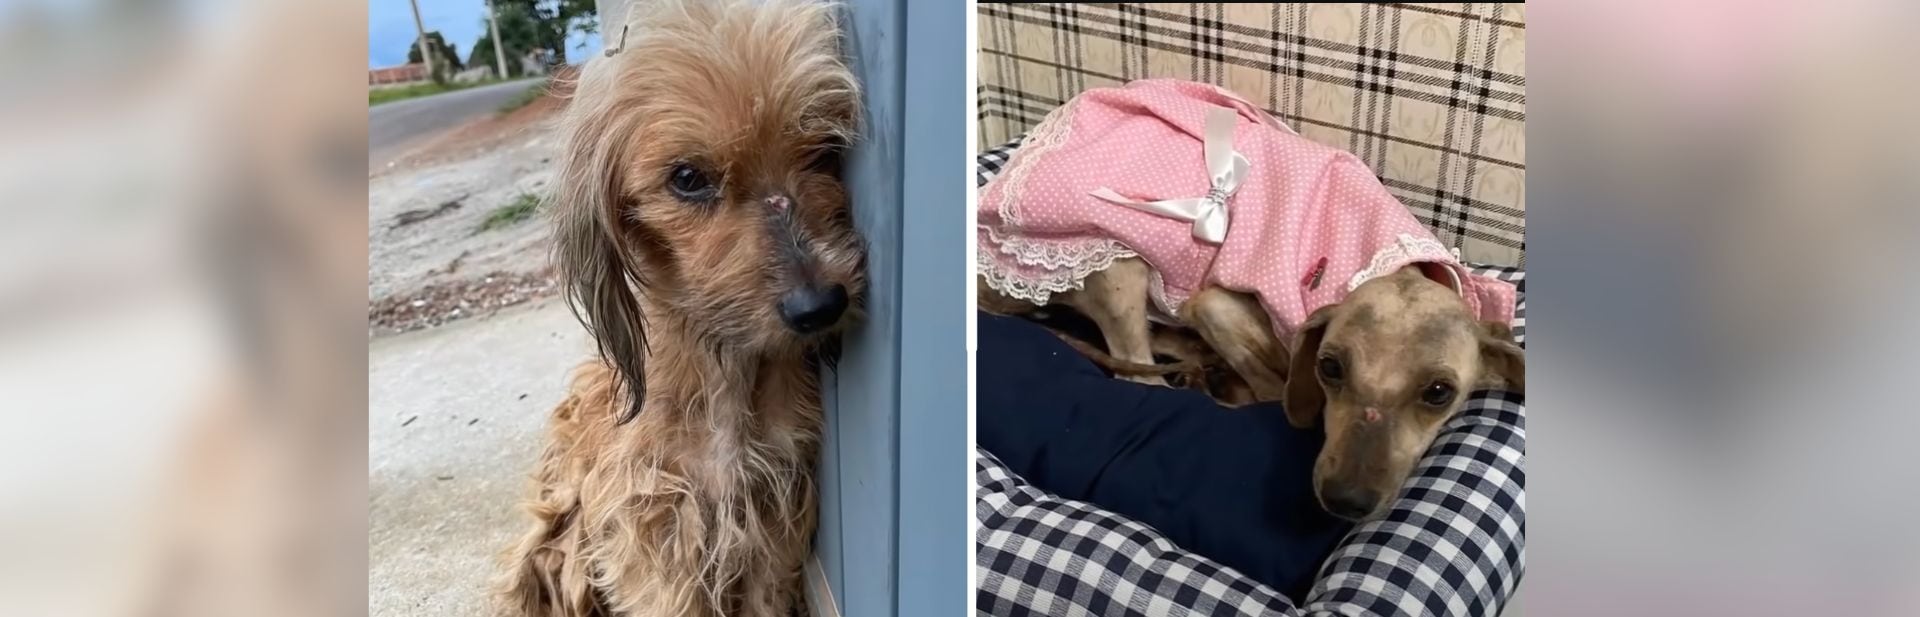 Starving Street Pup Discovers New Hope Through Unexpected Rescue